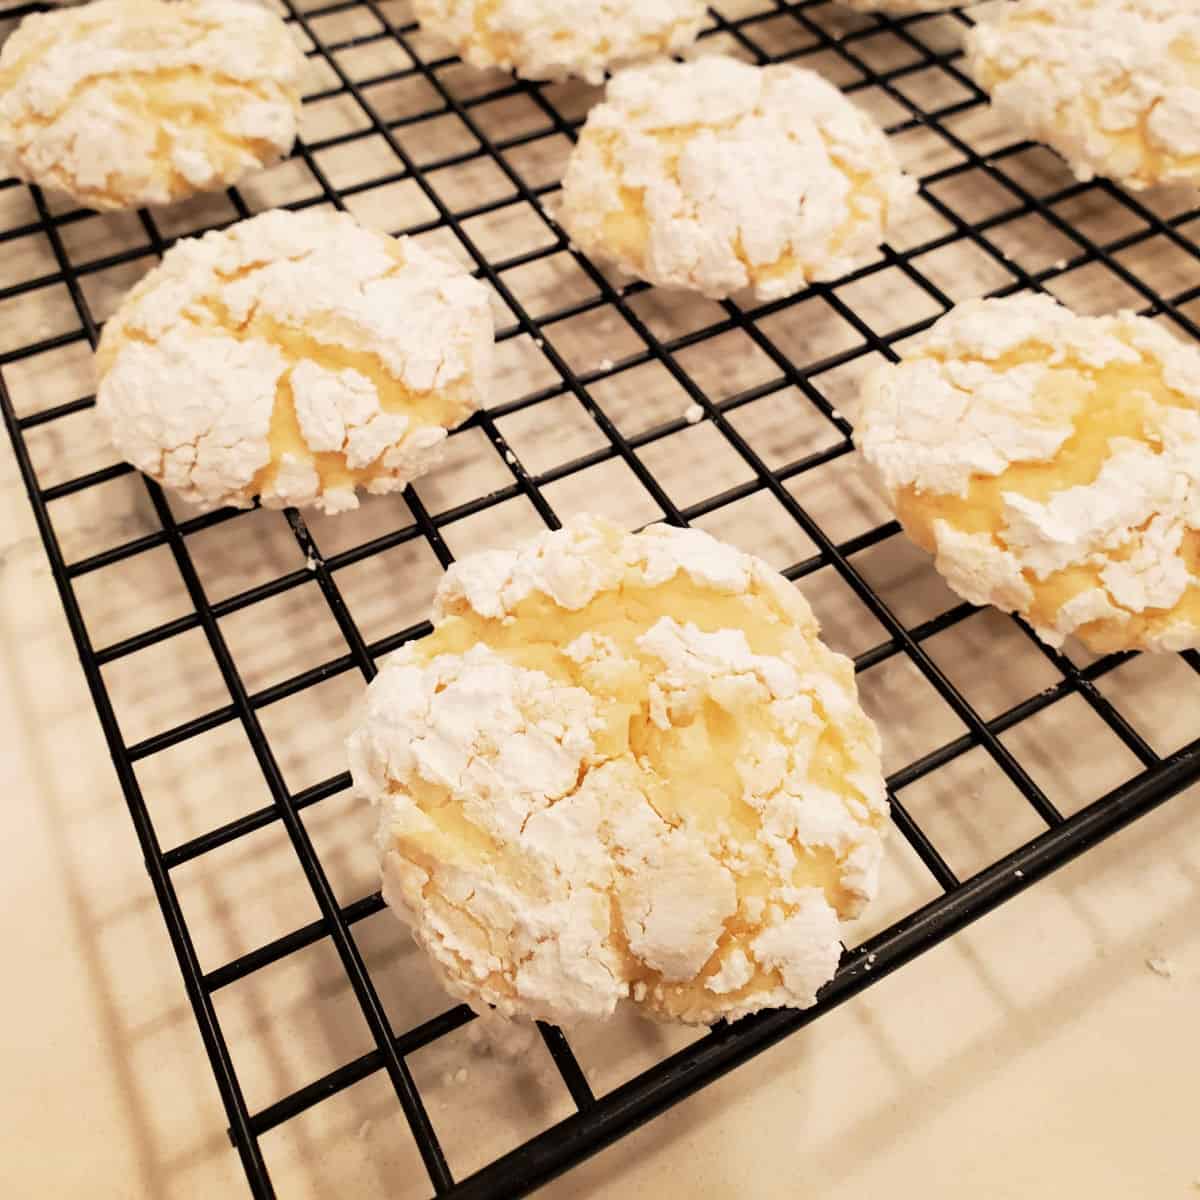 Lemon butter cookies on a wire rack